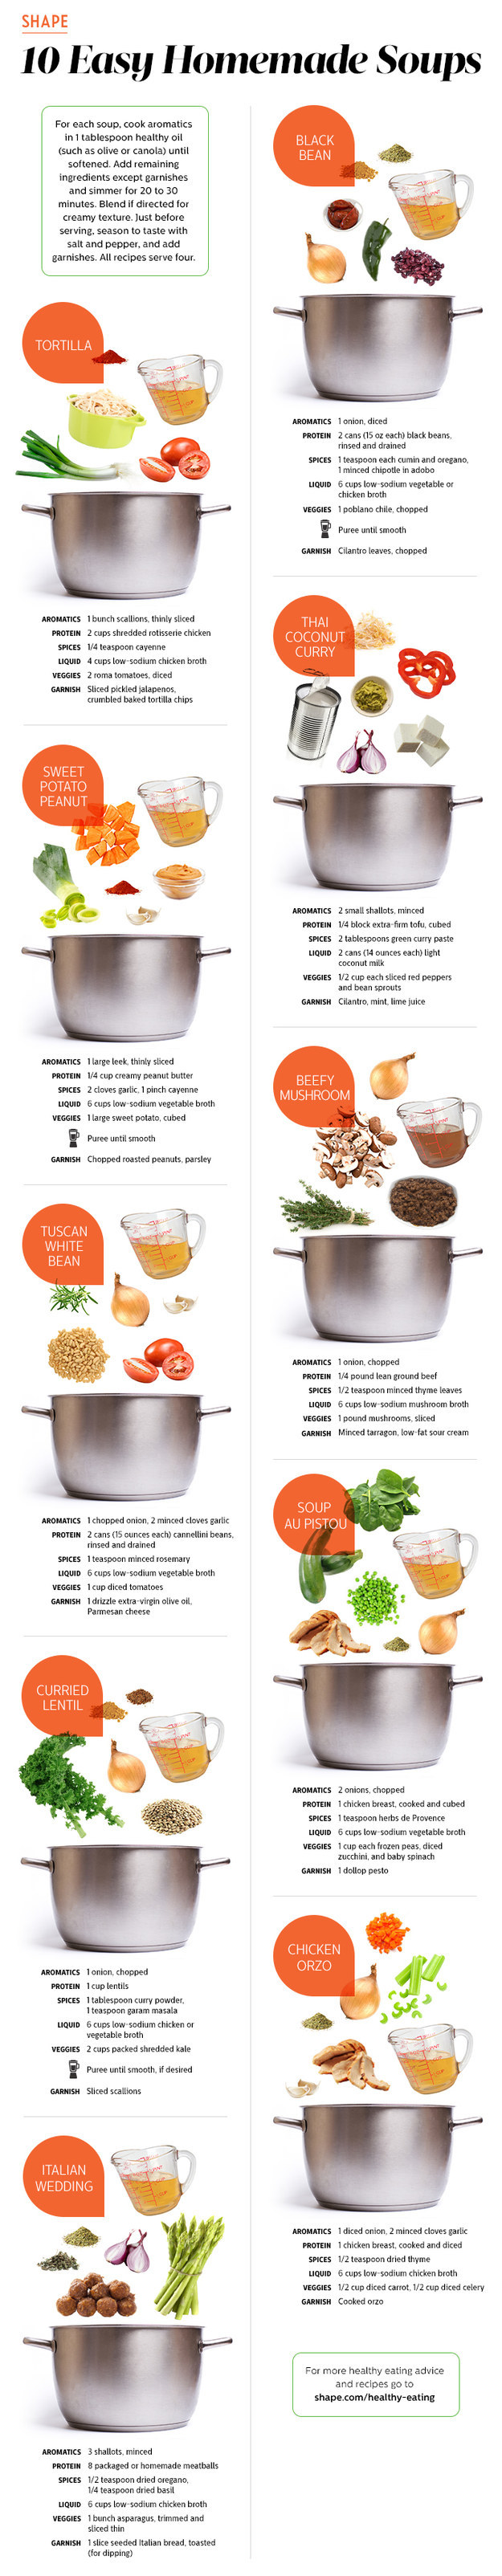 For making yummy, healthy soups.